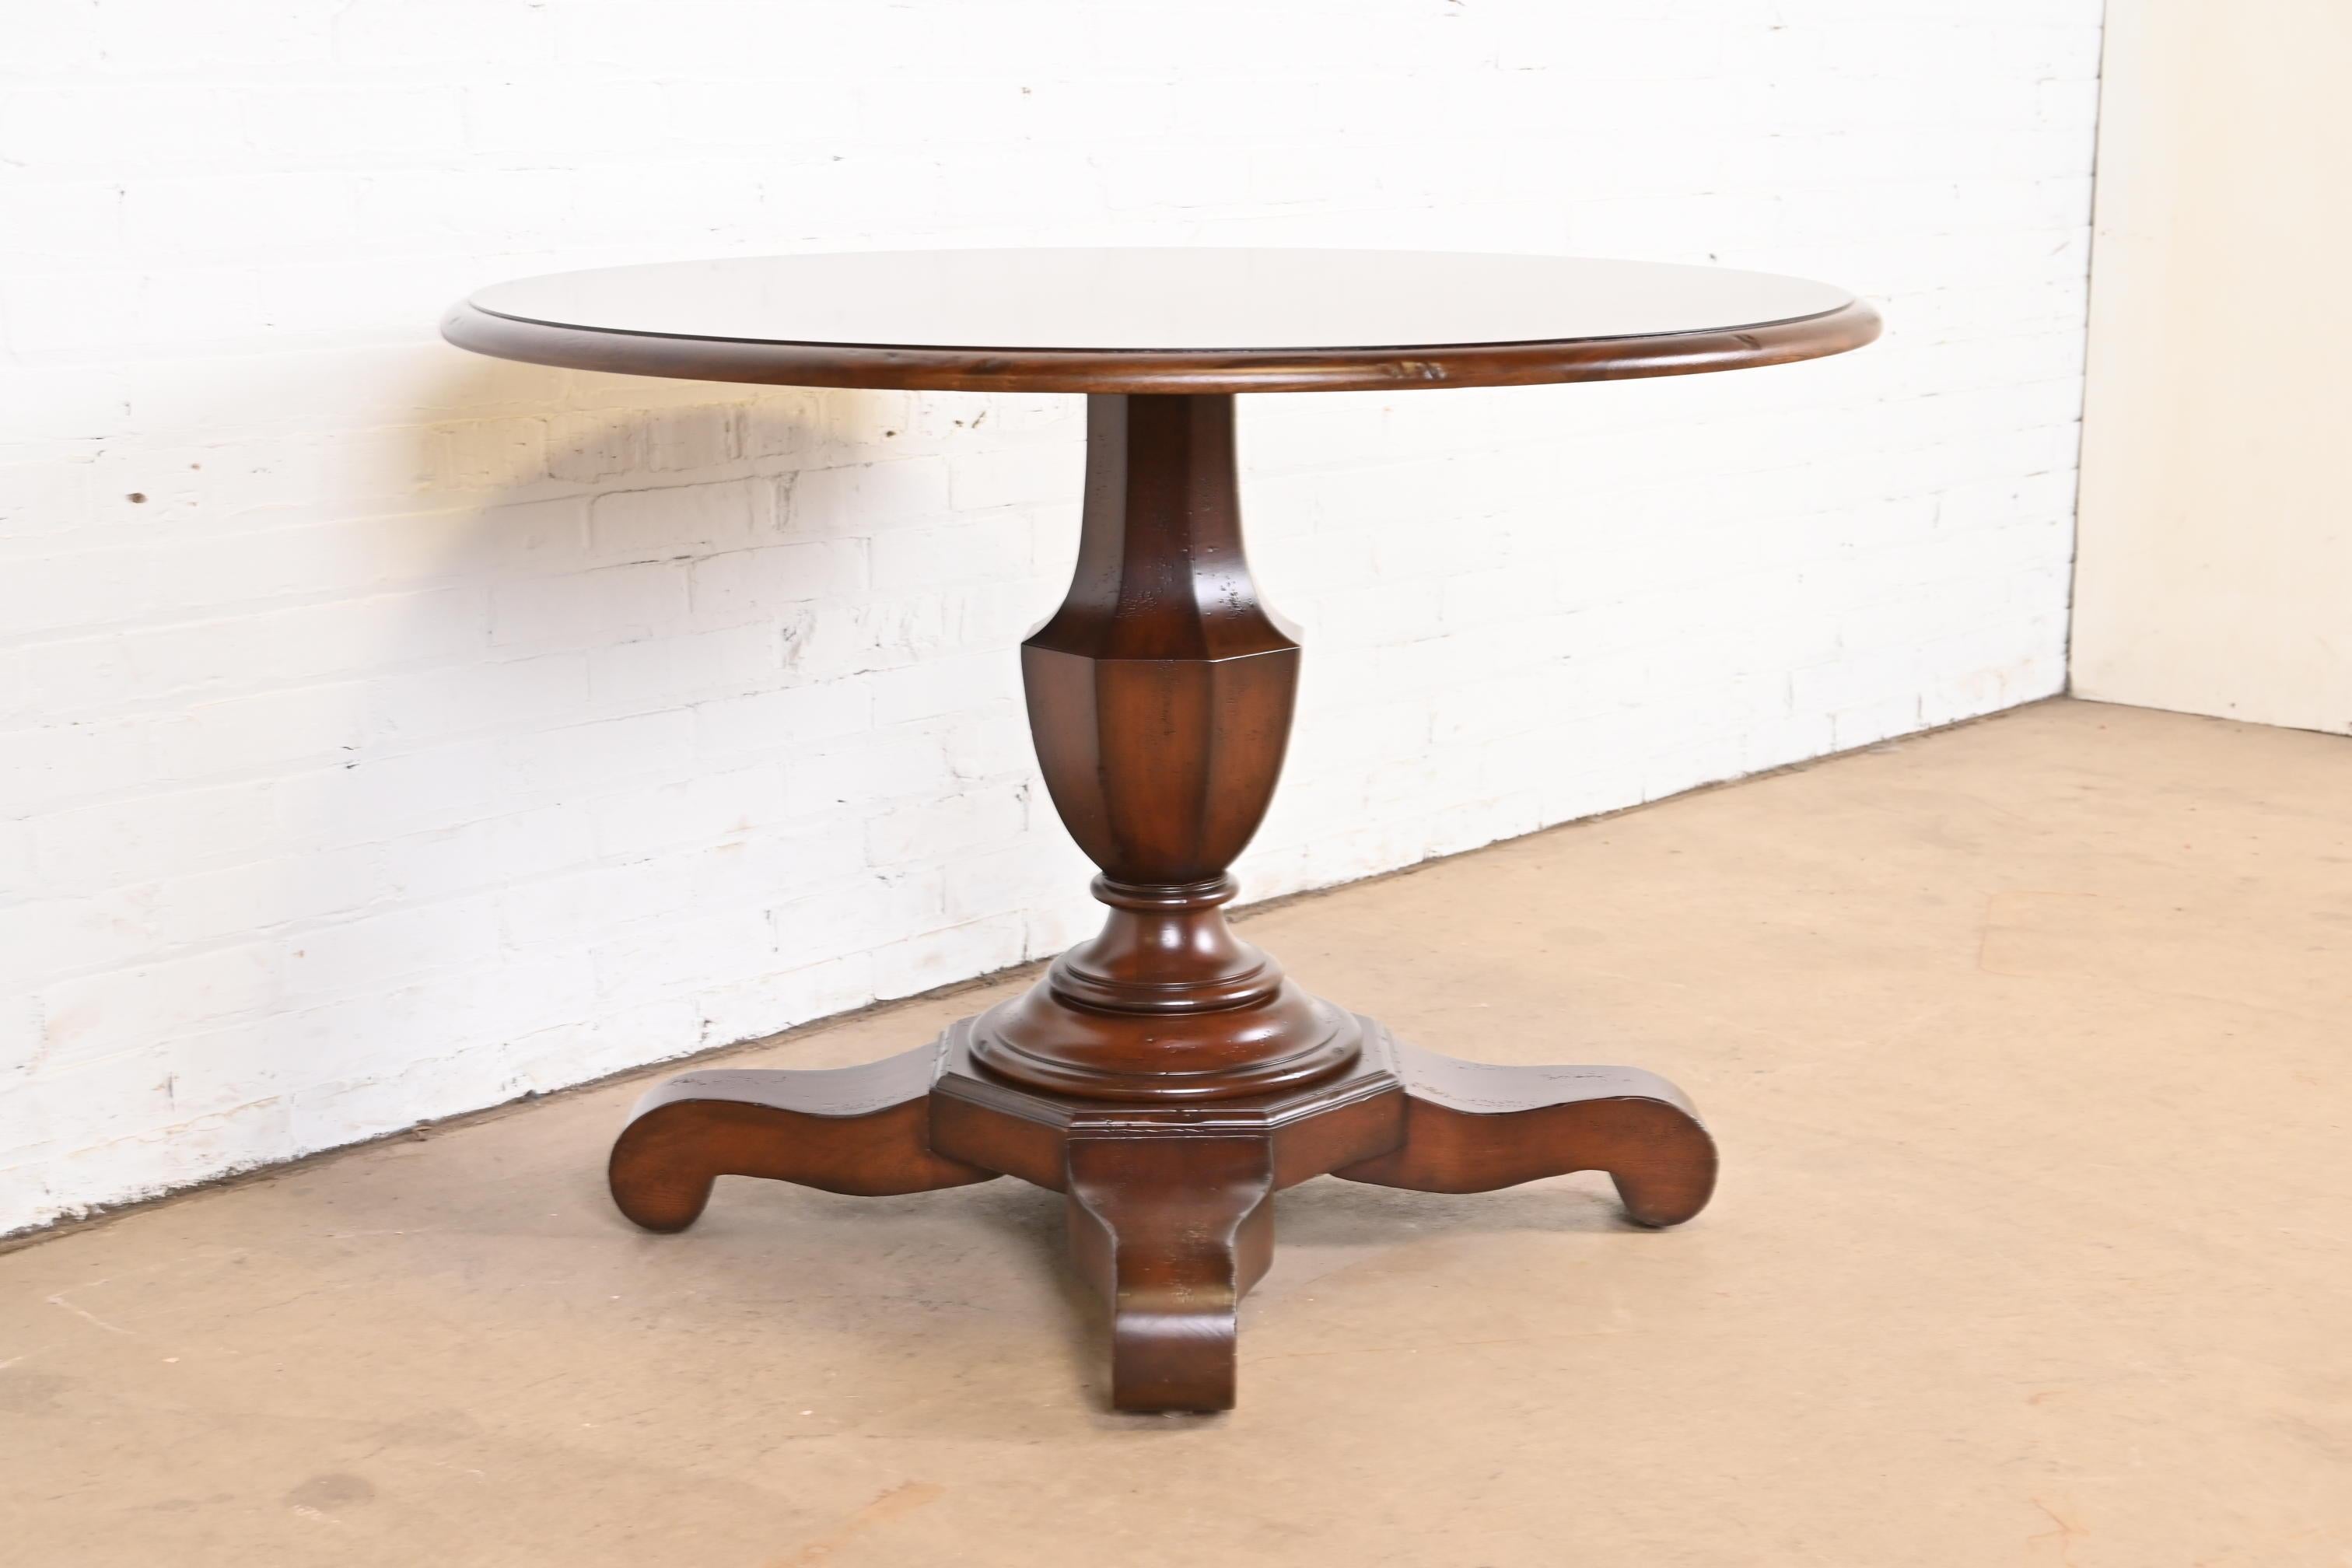 Baker Furniture Empire Carved Mahogany Pedestal Breakfast Table or Center Table 2